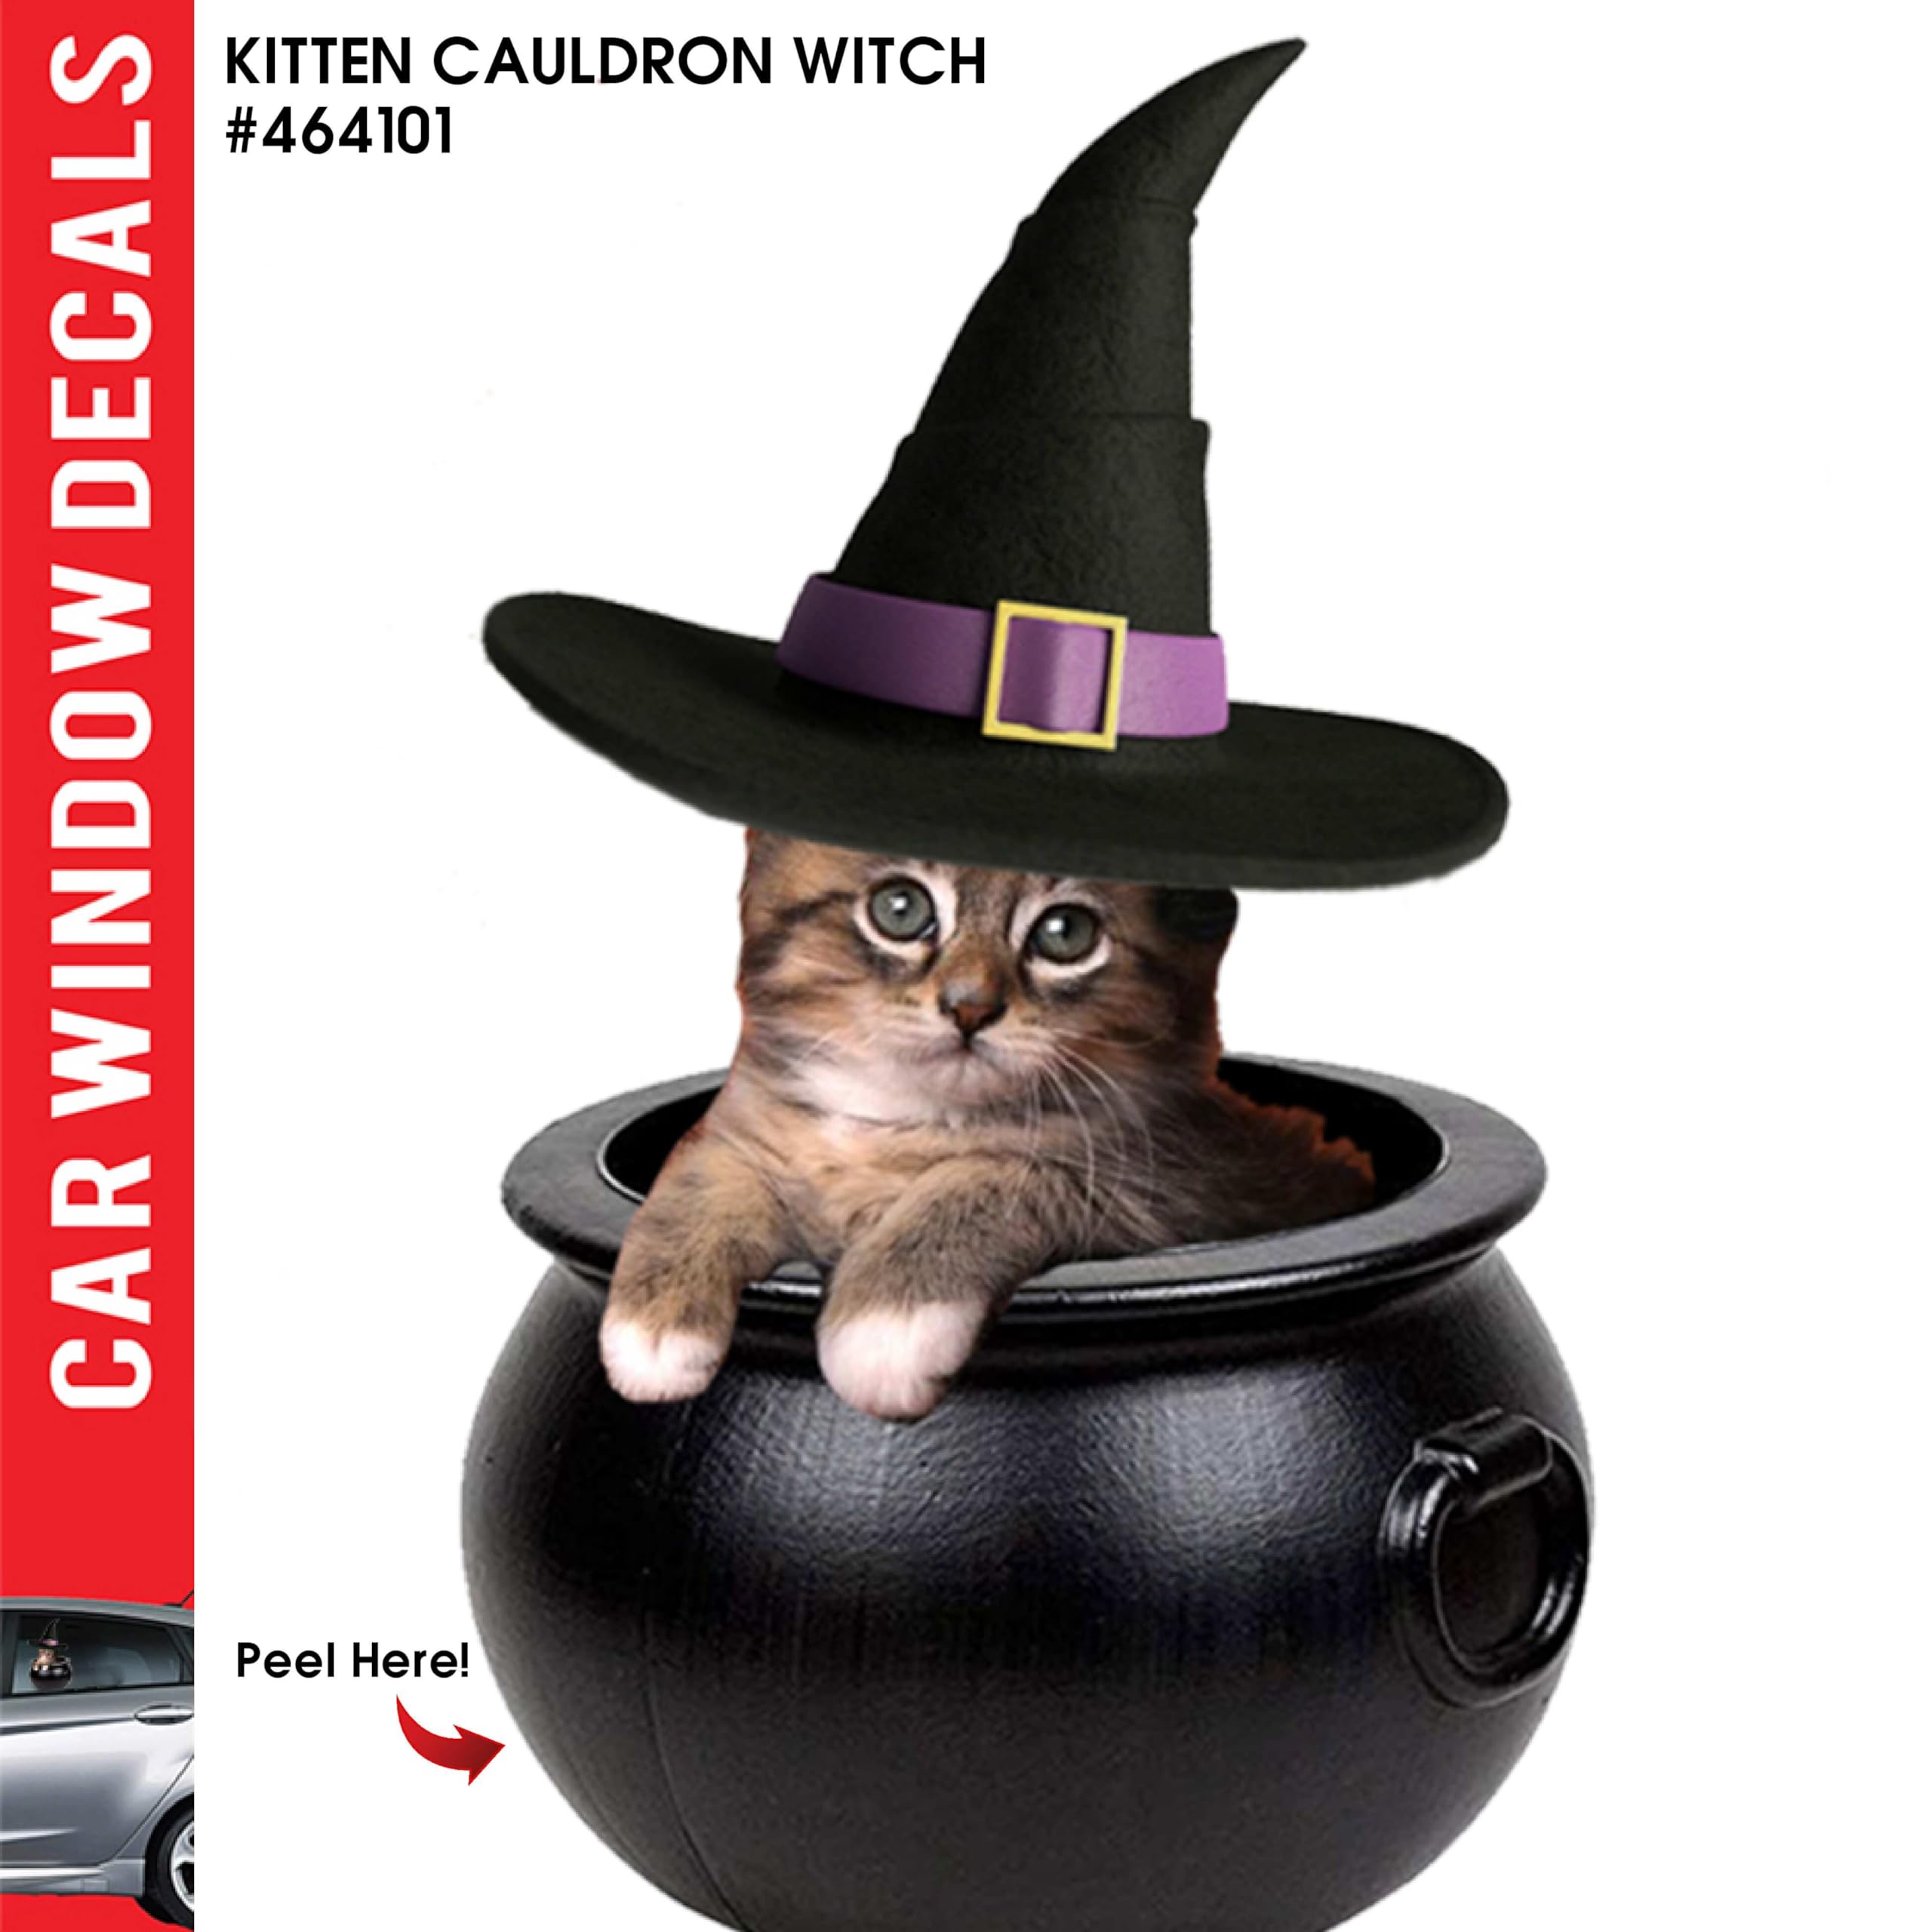 Car Window Decal Funny 3D Kitchen Witch in Cauldron Halloween Decals for Any Smooth Surface - Gifts for Halloween (Kitchen Witch in Cauldron)